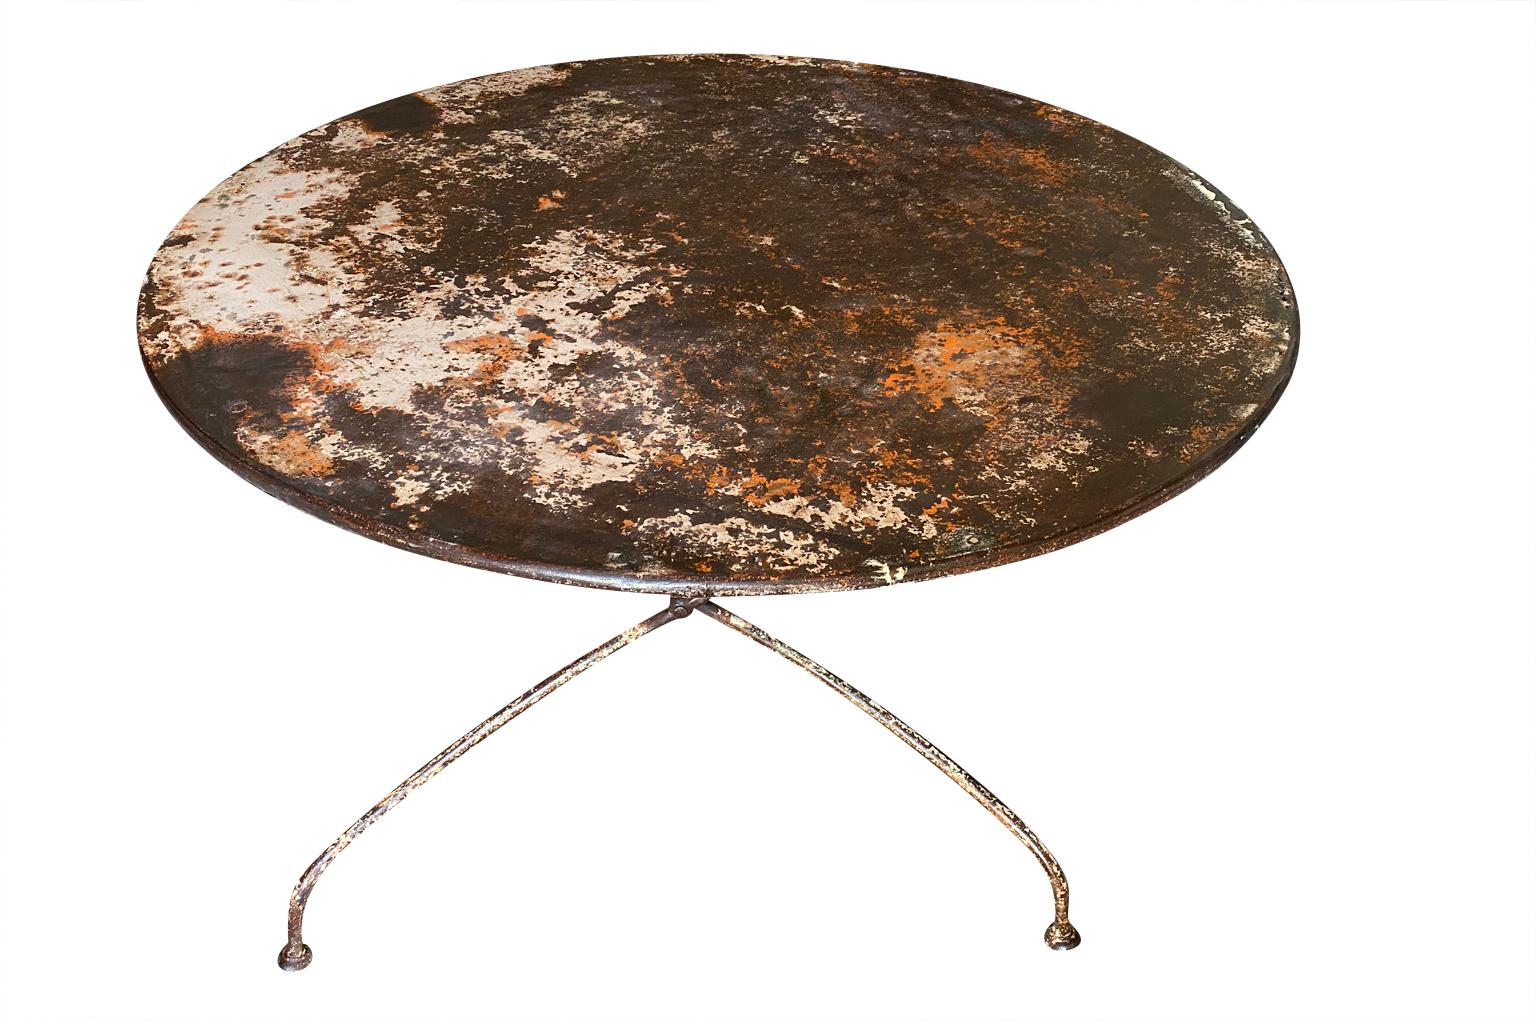 A very charming later 19th century Garden Table from the Provence region of France.  Soundly constructed from painted iron and is collapsible.  Super patina.  Perfect for any garden or interior.